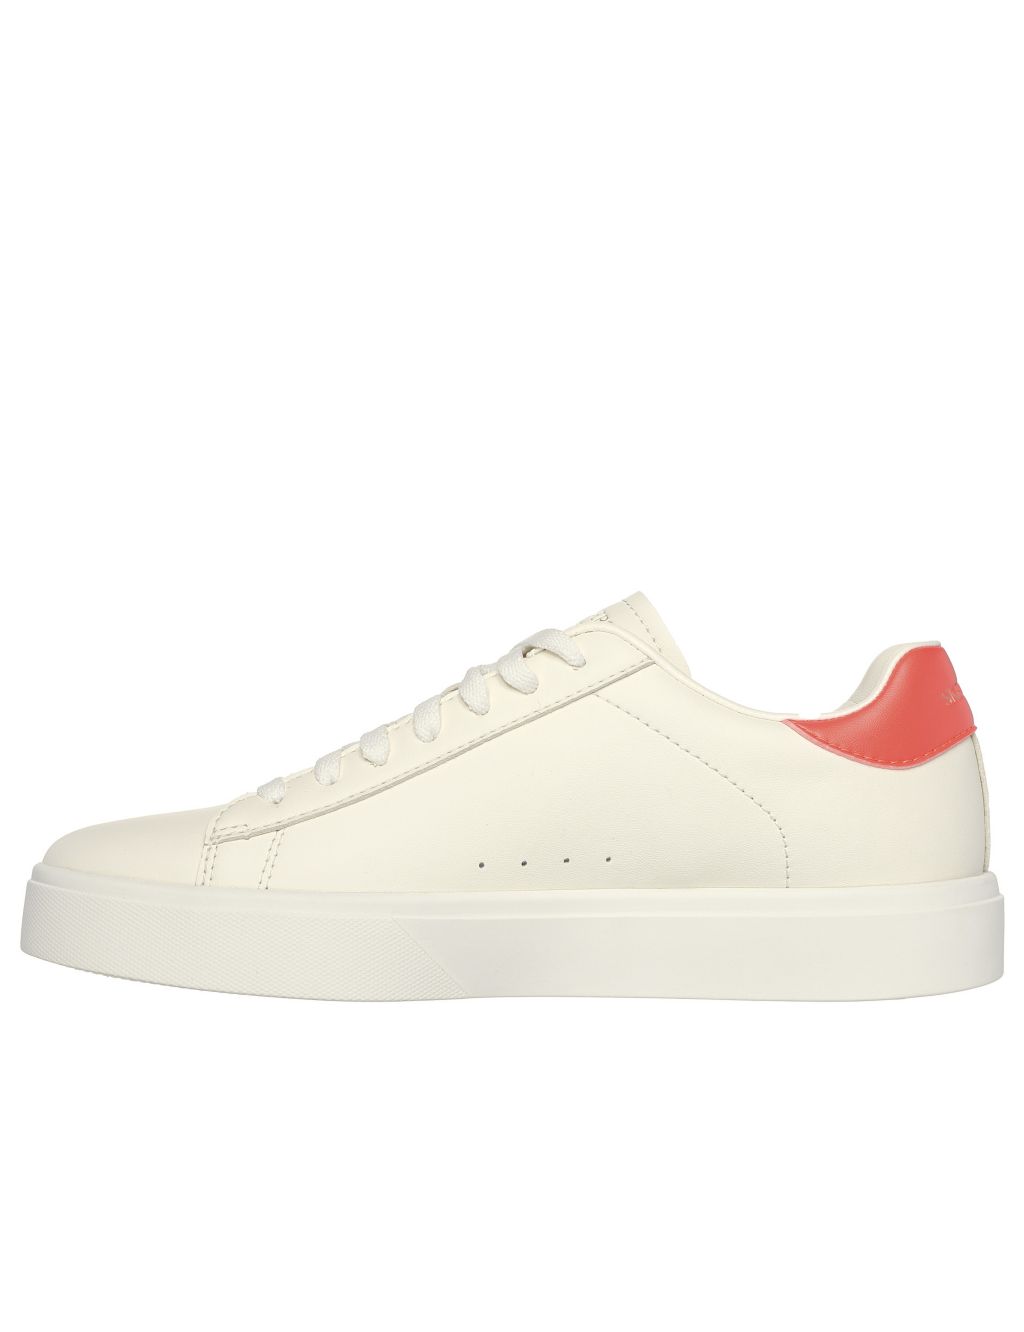 Eden LX Top Grade Lace Up Trainers 2 of 5